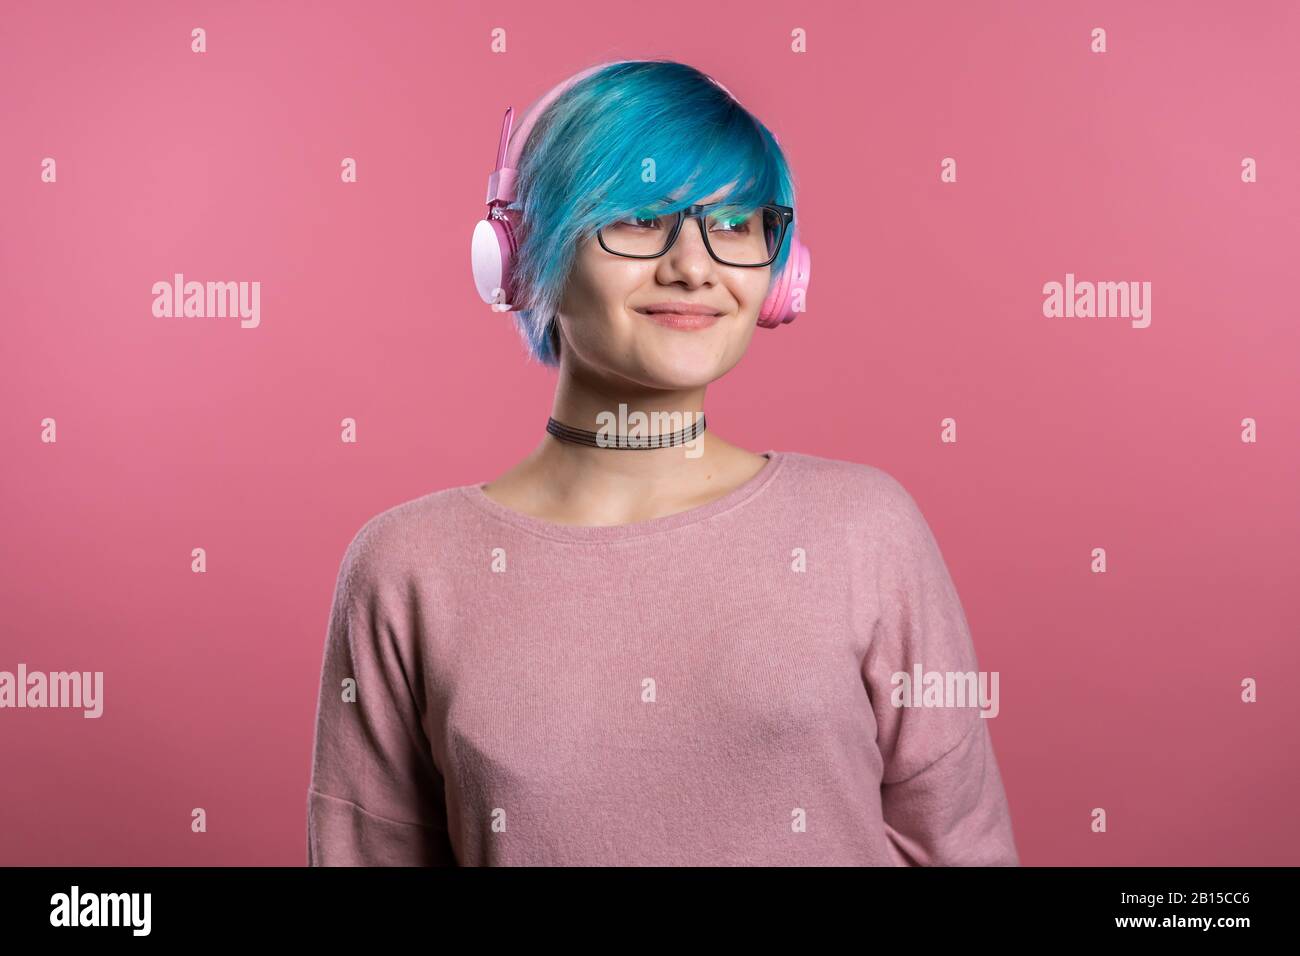 Pretty young girl with blue hair having fun, smiling, dancing with pink headphones in studio on colorful background. Music, dance, radio concept. Stock Photo